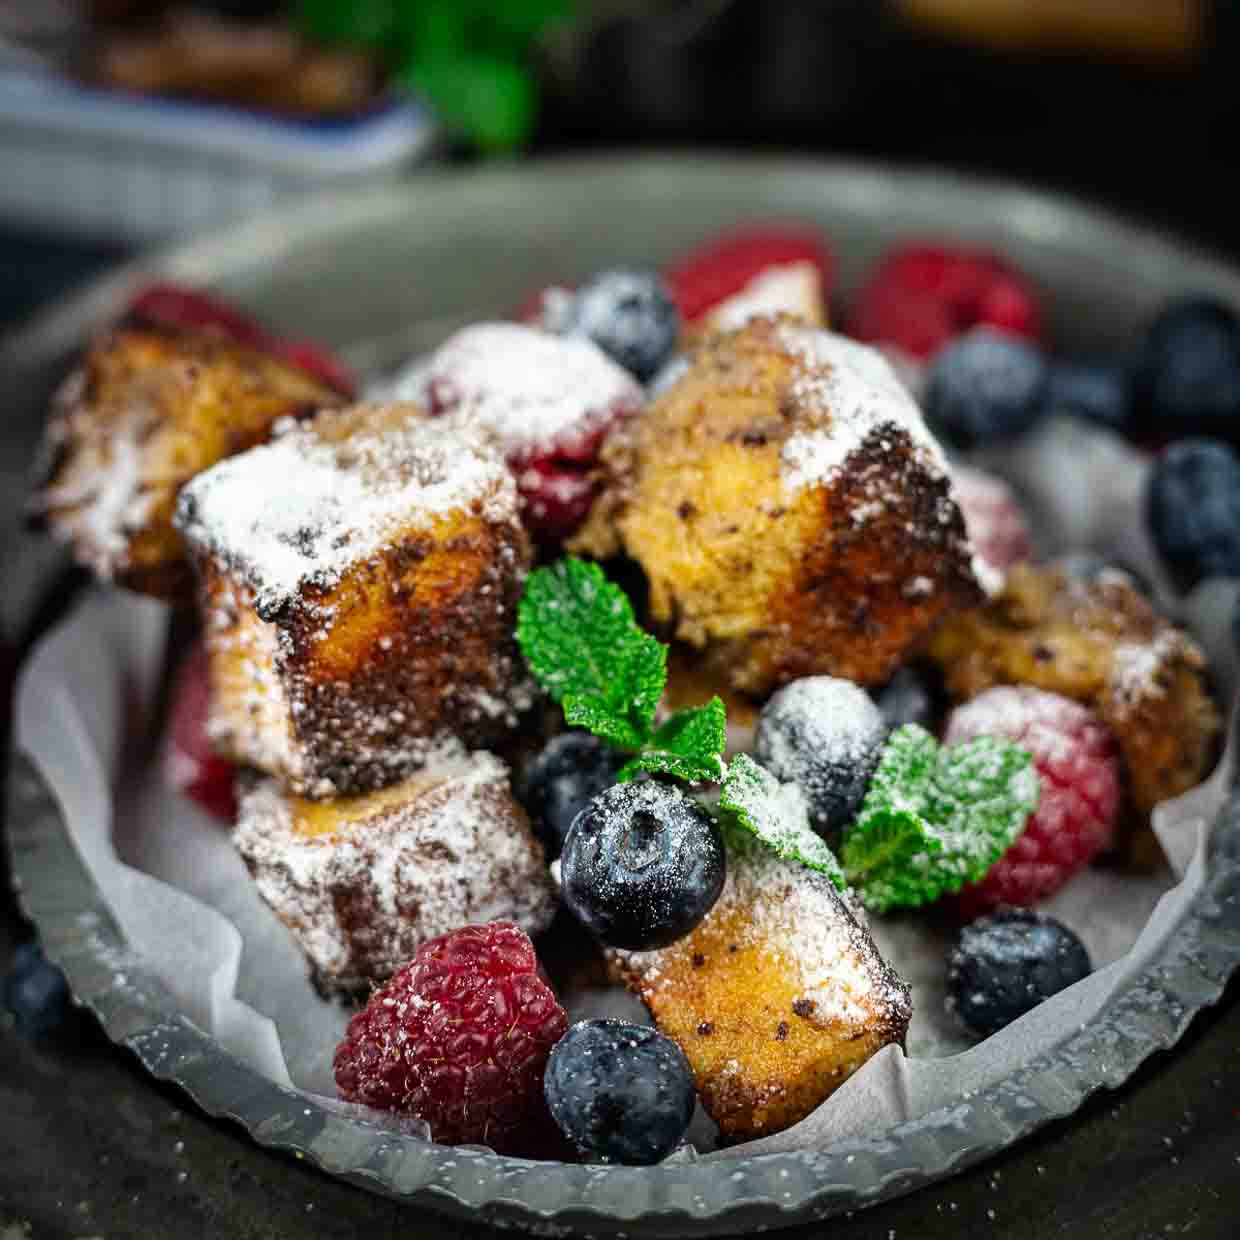 Baked French Toast served on a plate.